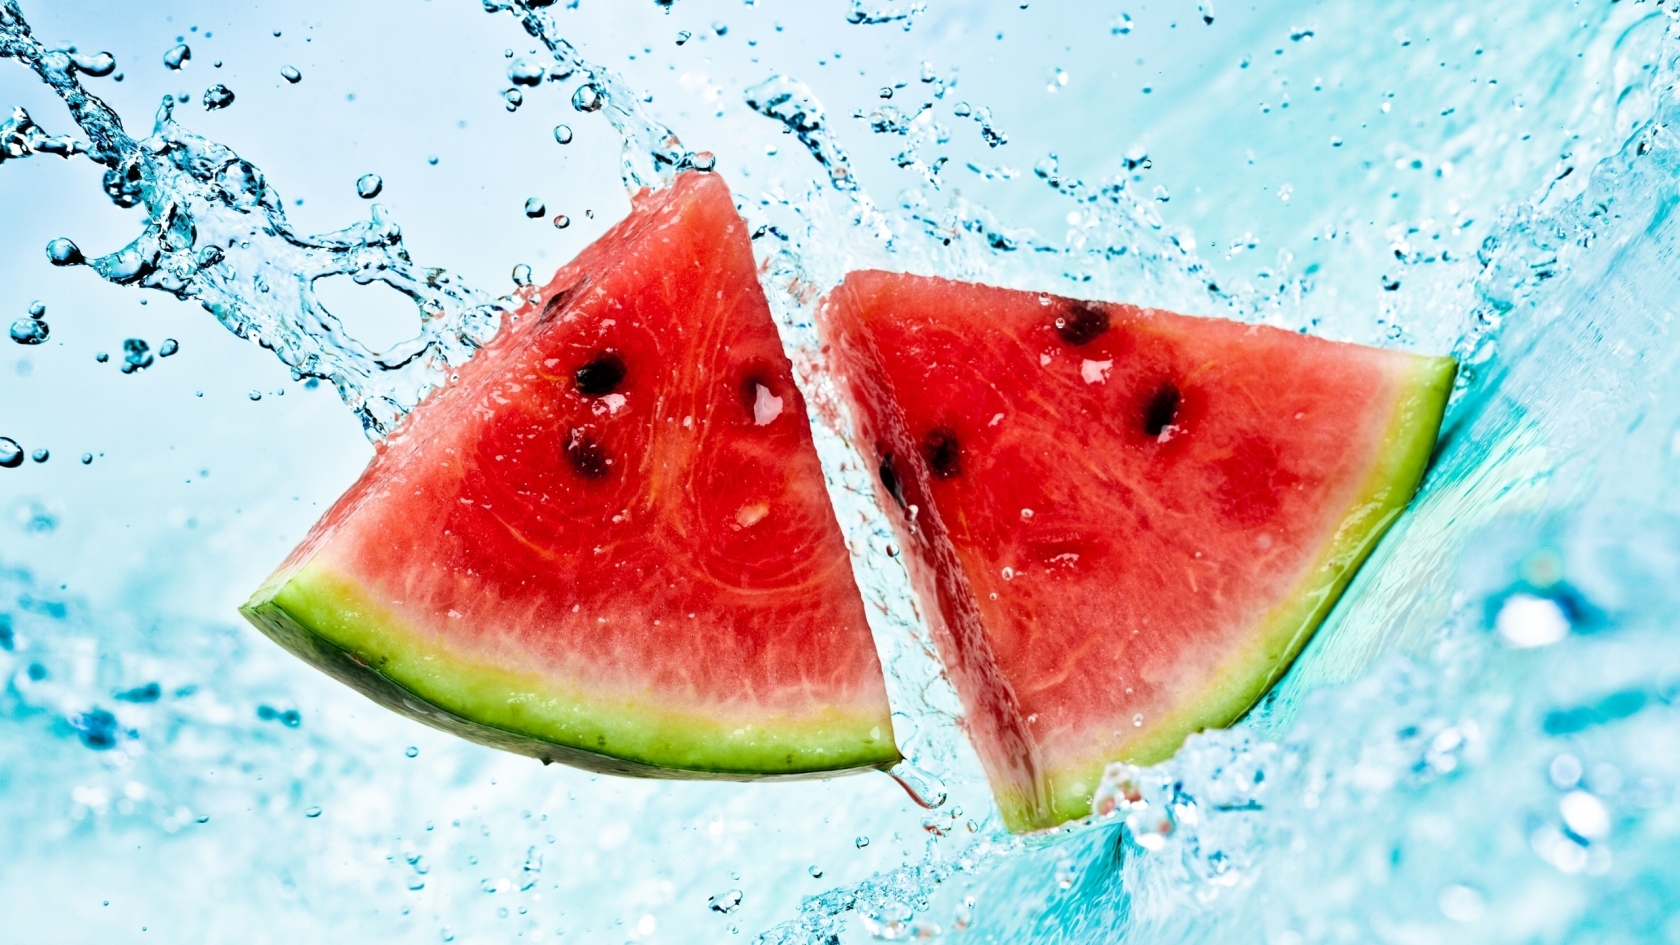 Watermelon Slices for 1680 x 945 HDTV resolution